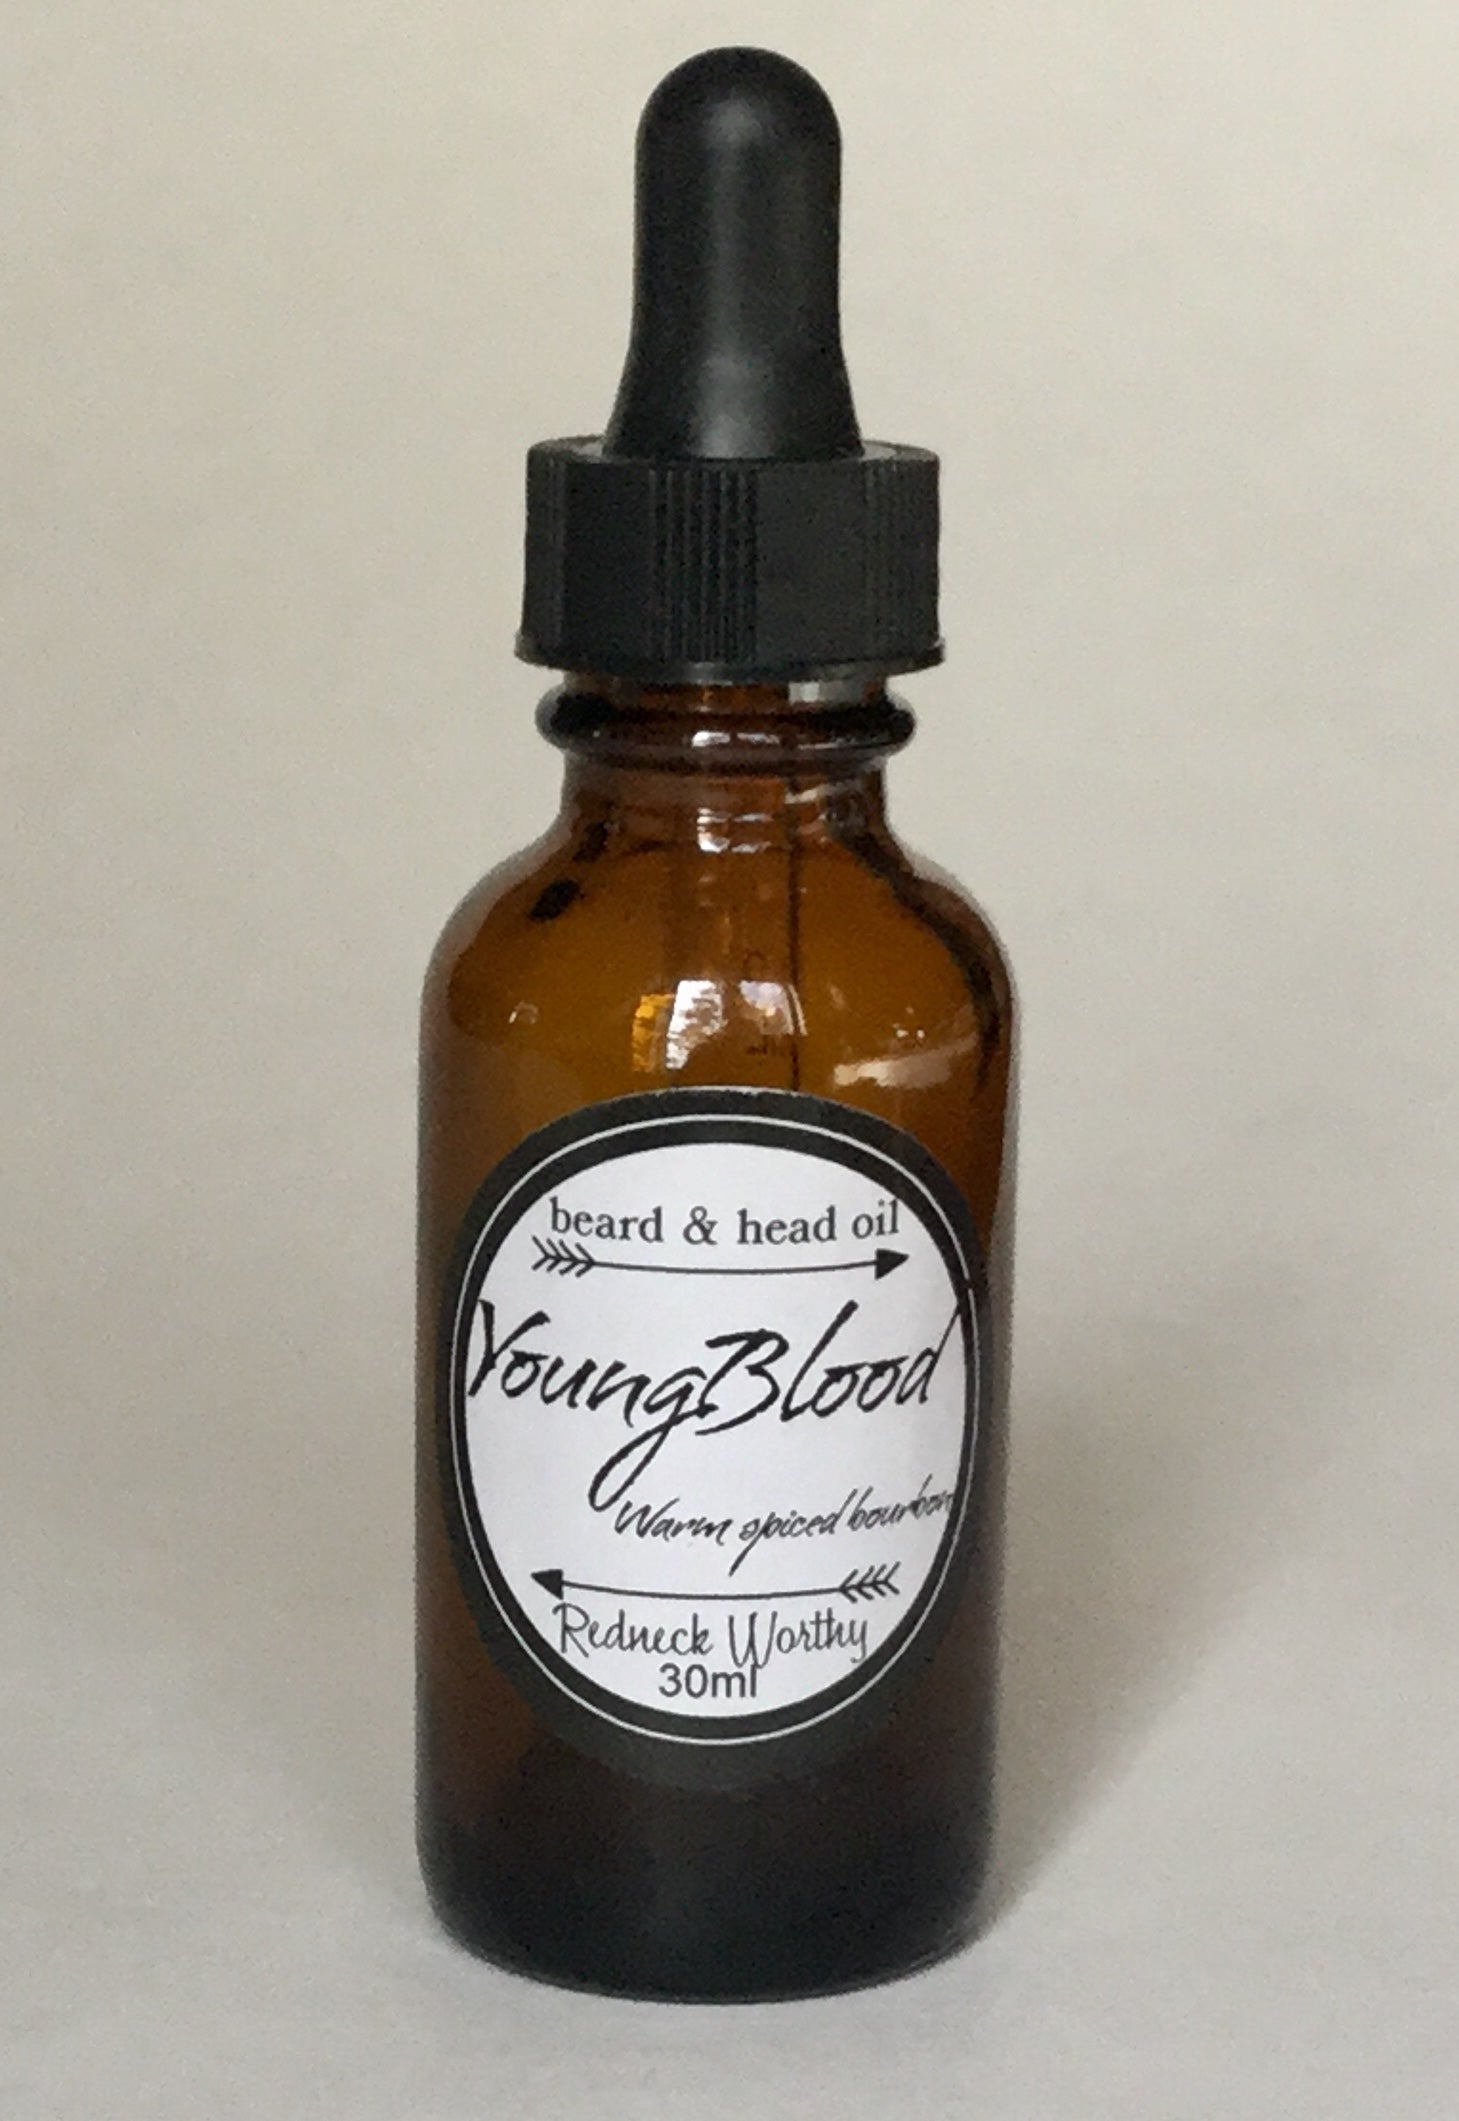 Young Blood beard oil